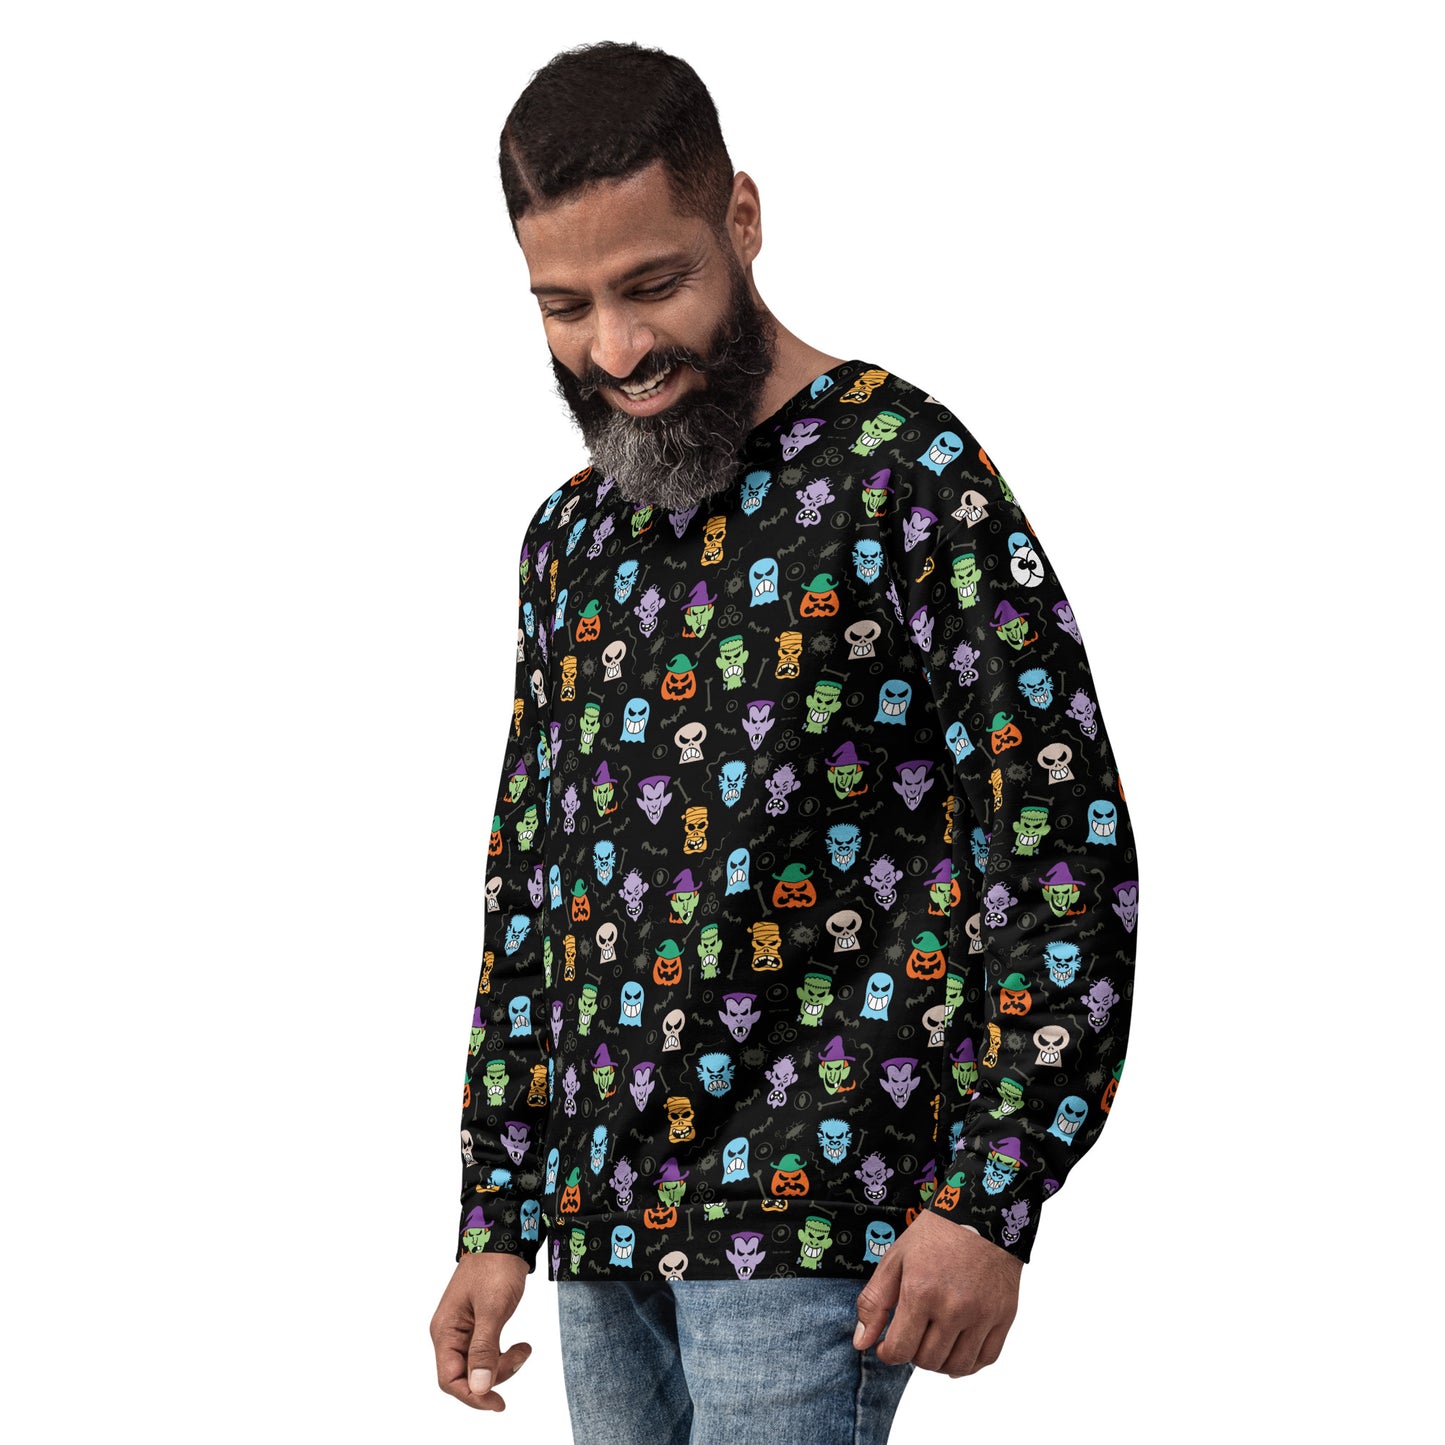 Scary Halloween faces Unisex Sweatshirt. Smiling man wearing All-over print Sweatshirt by Zoo&co